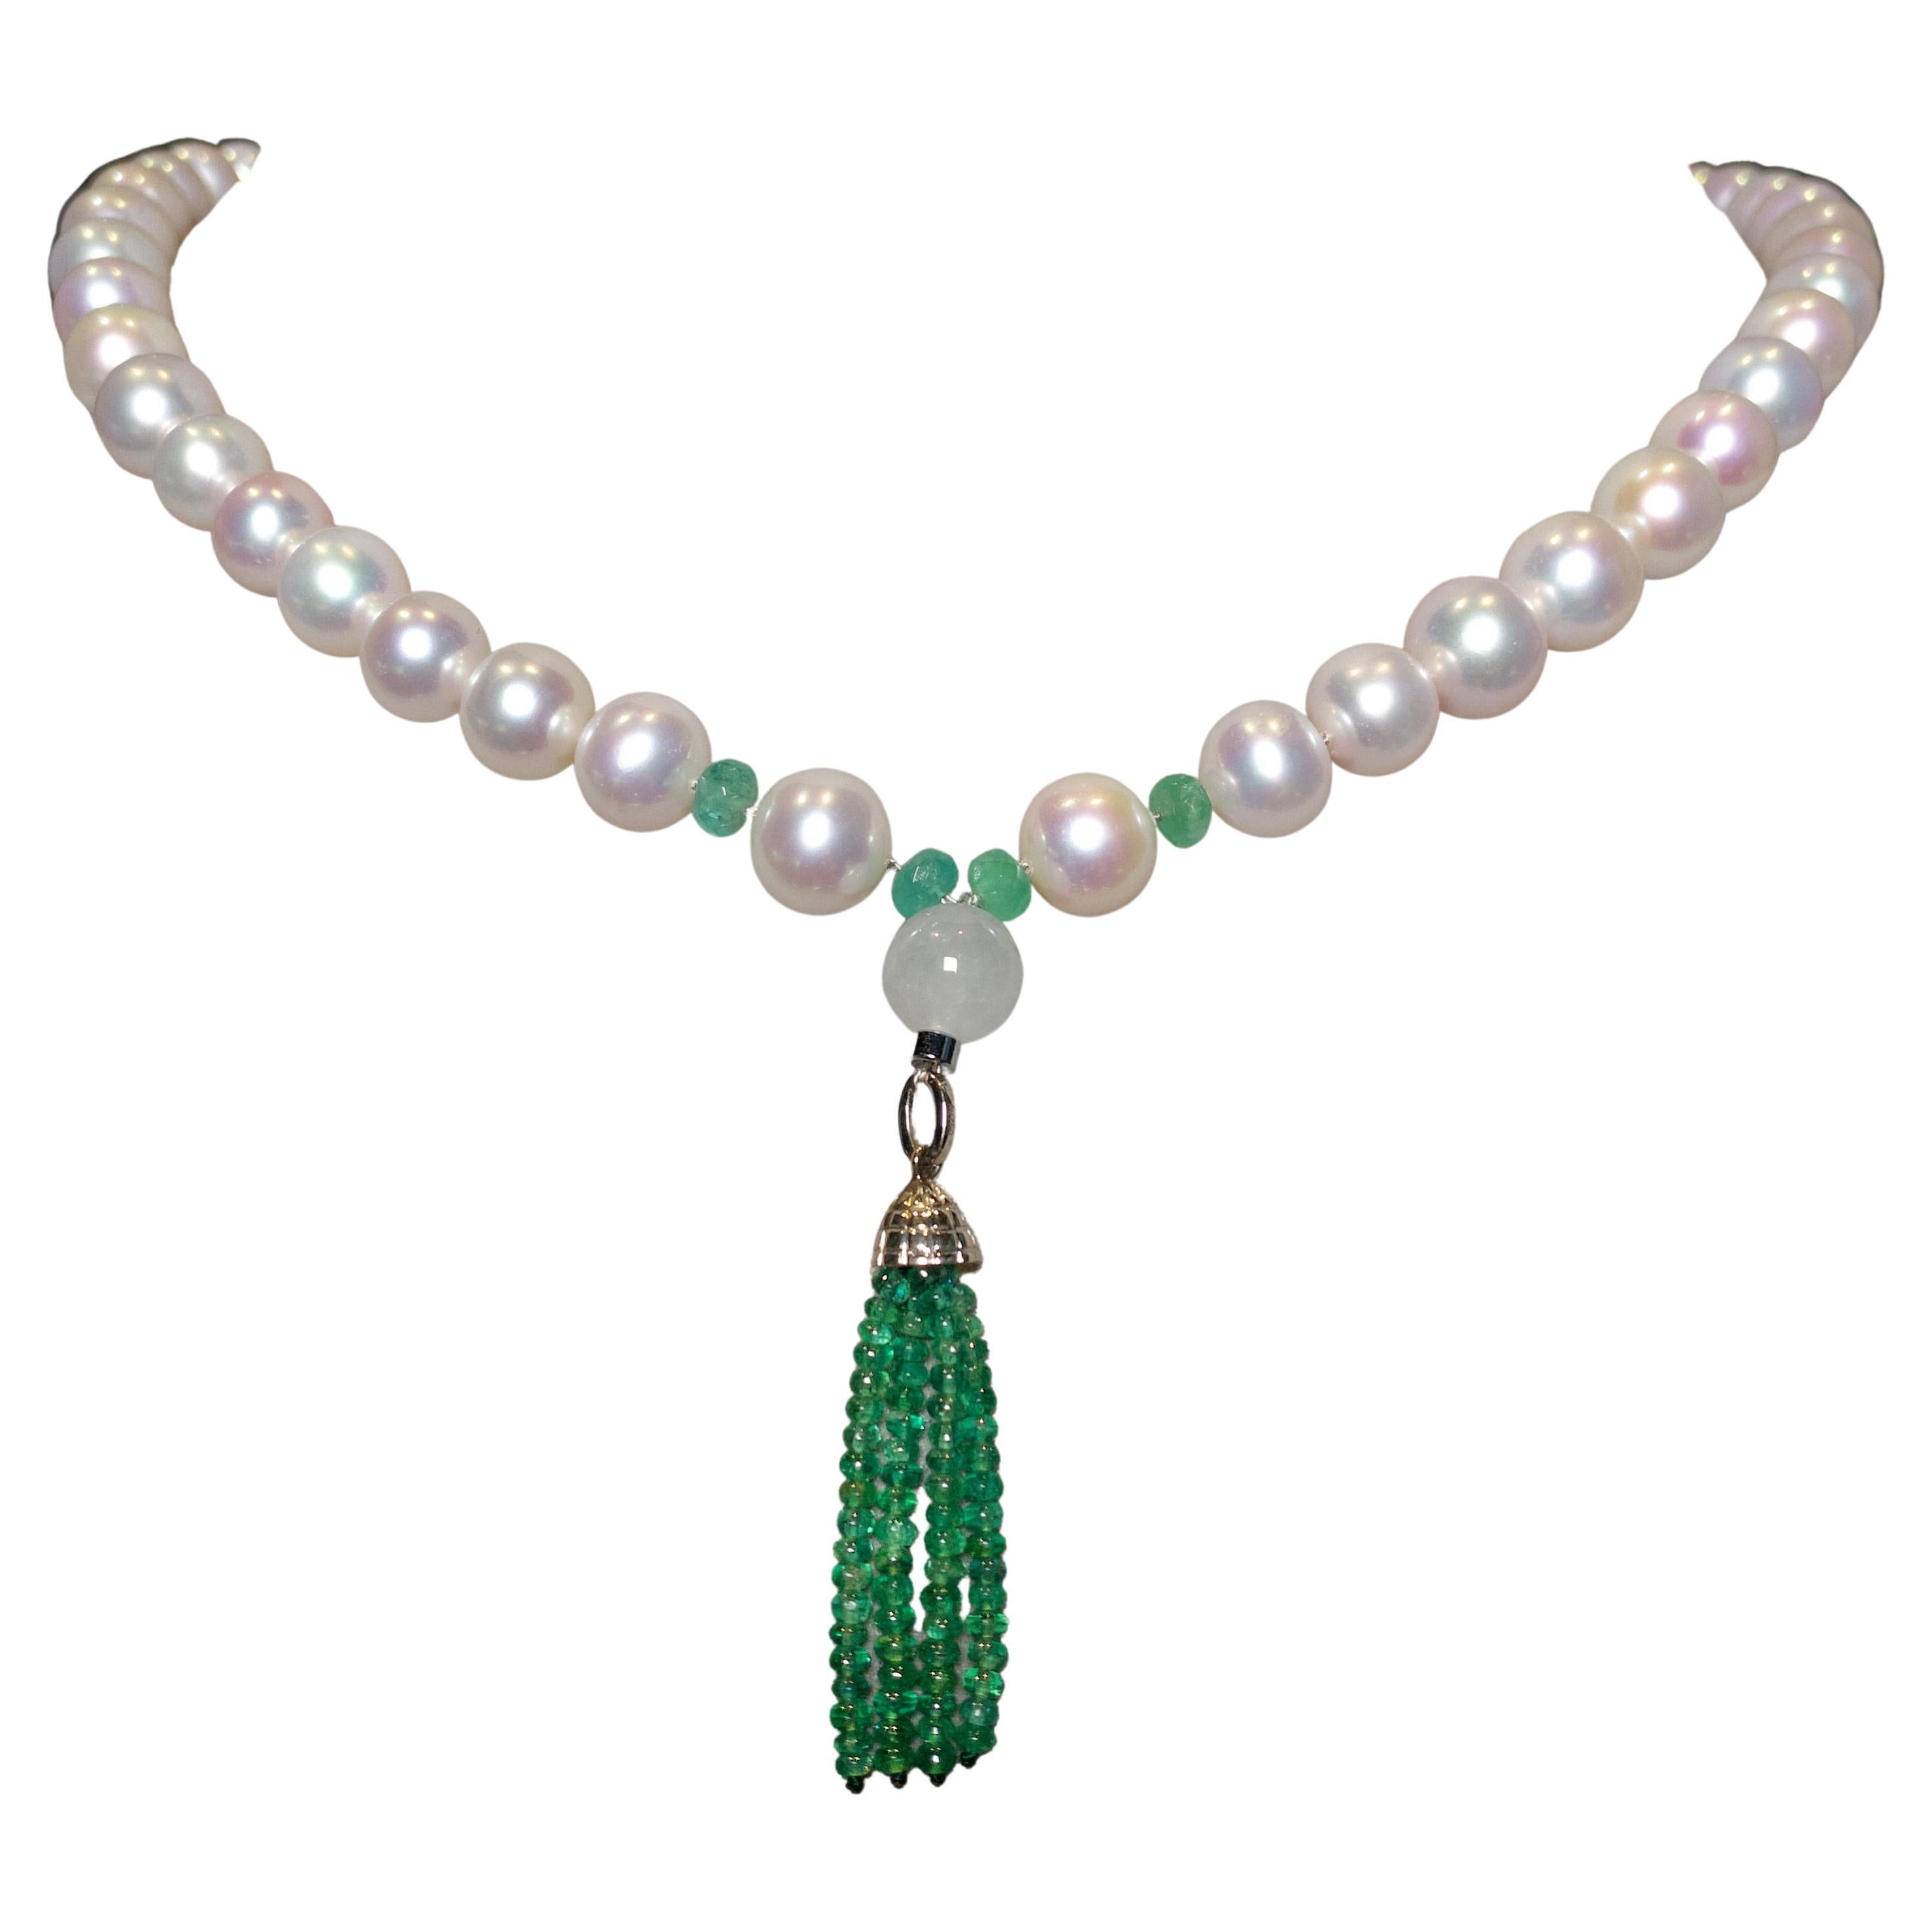 Freshwater Pearl, Emerald and Jadeite Necklace with 18k Gold Clasp